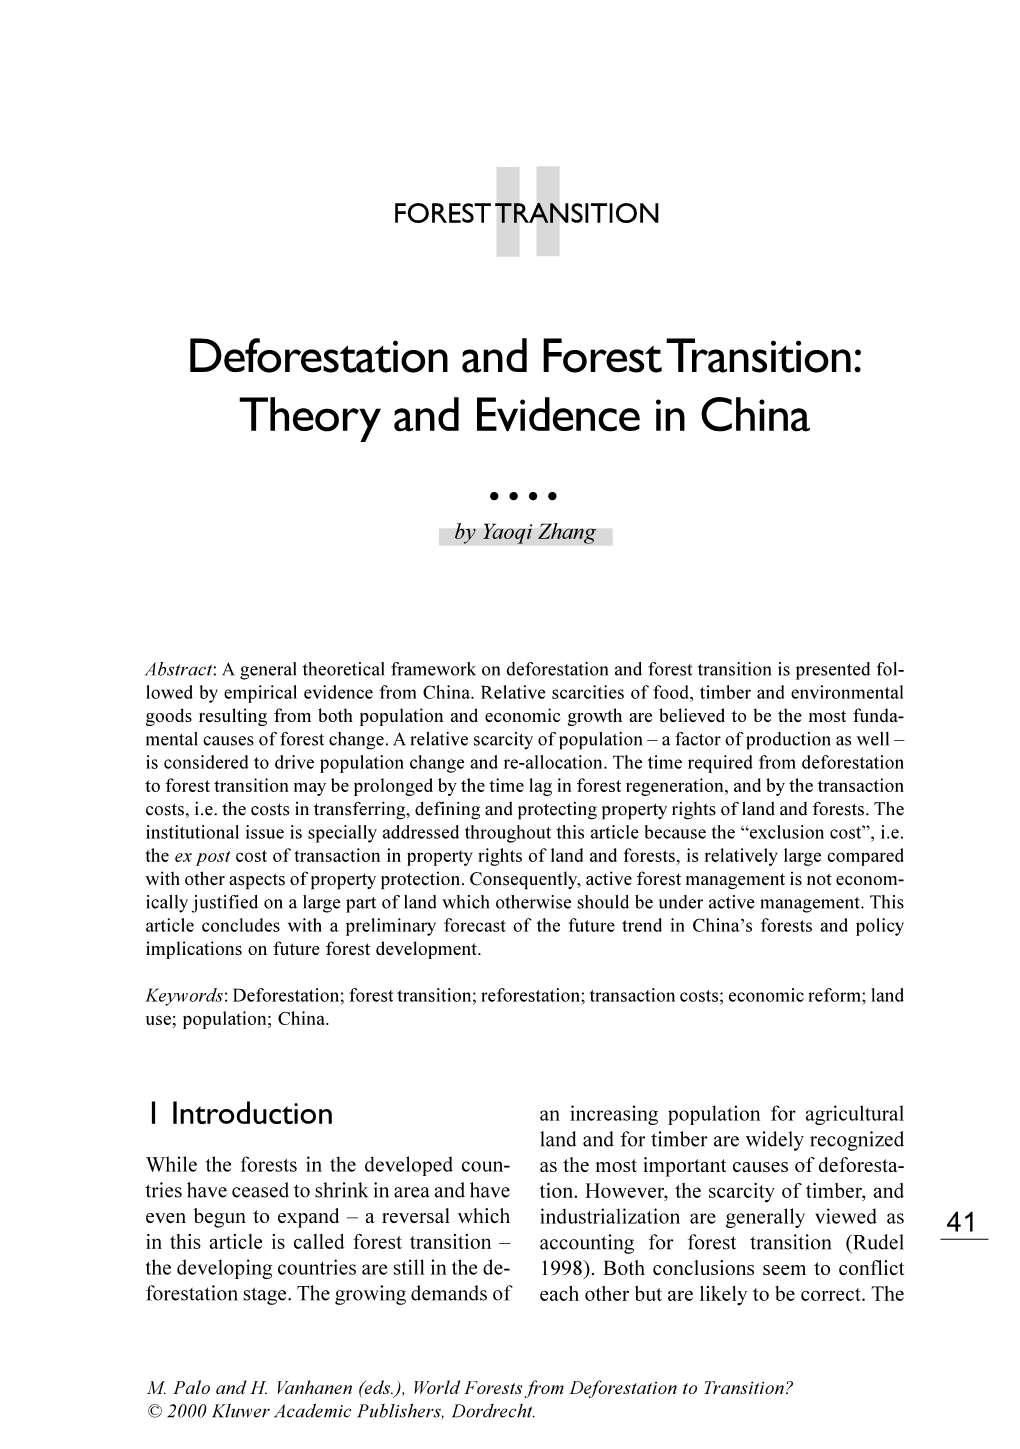 Deforestation and Forest Transition: Theory and Evidence in China